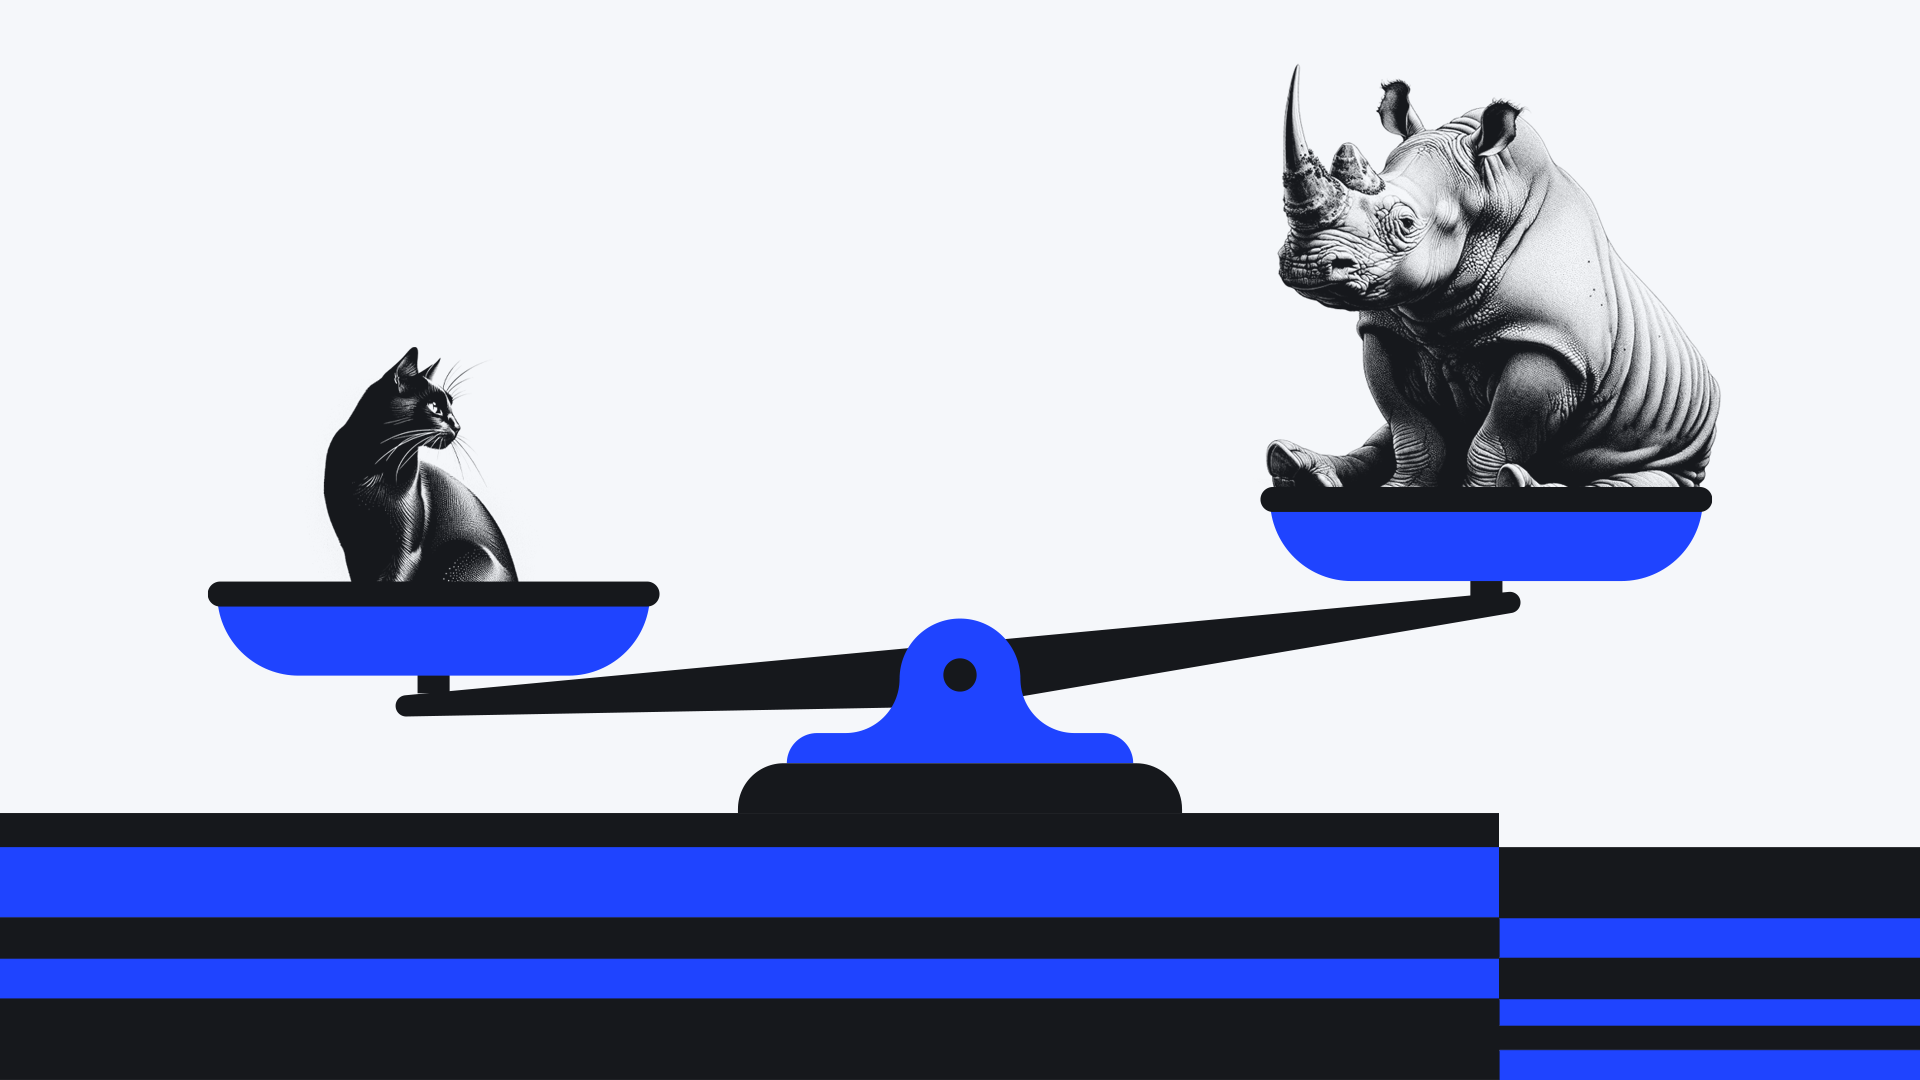 A cat and rhino are on opposite ends of a stylized seesaw, symbolizing a weight comparison.